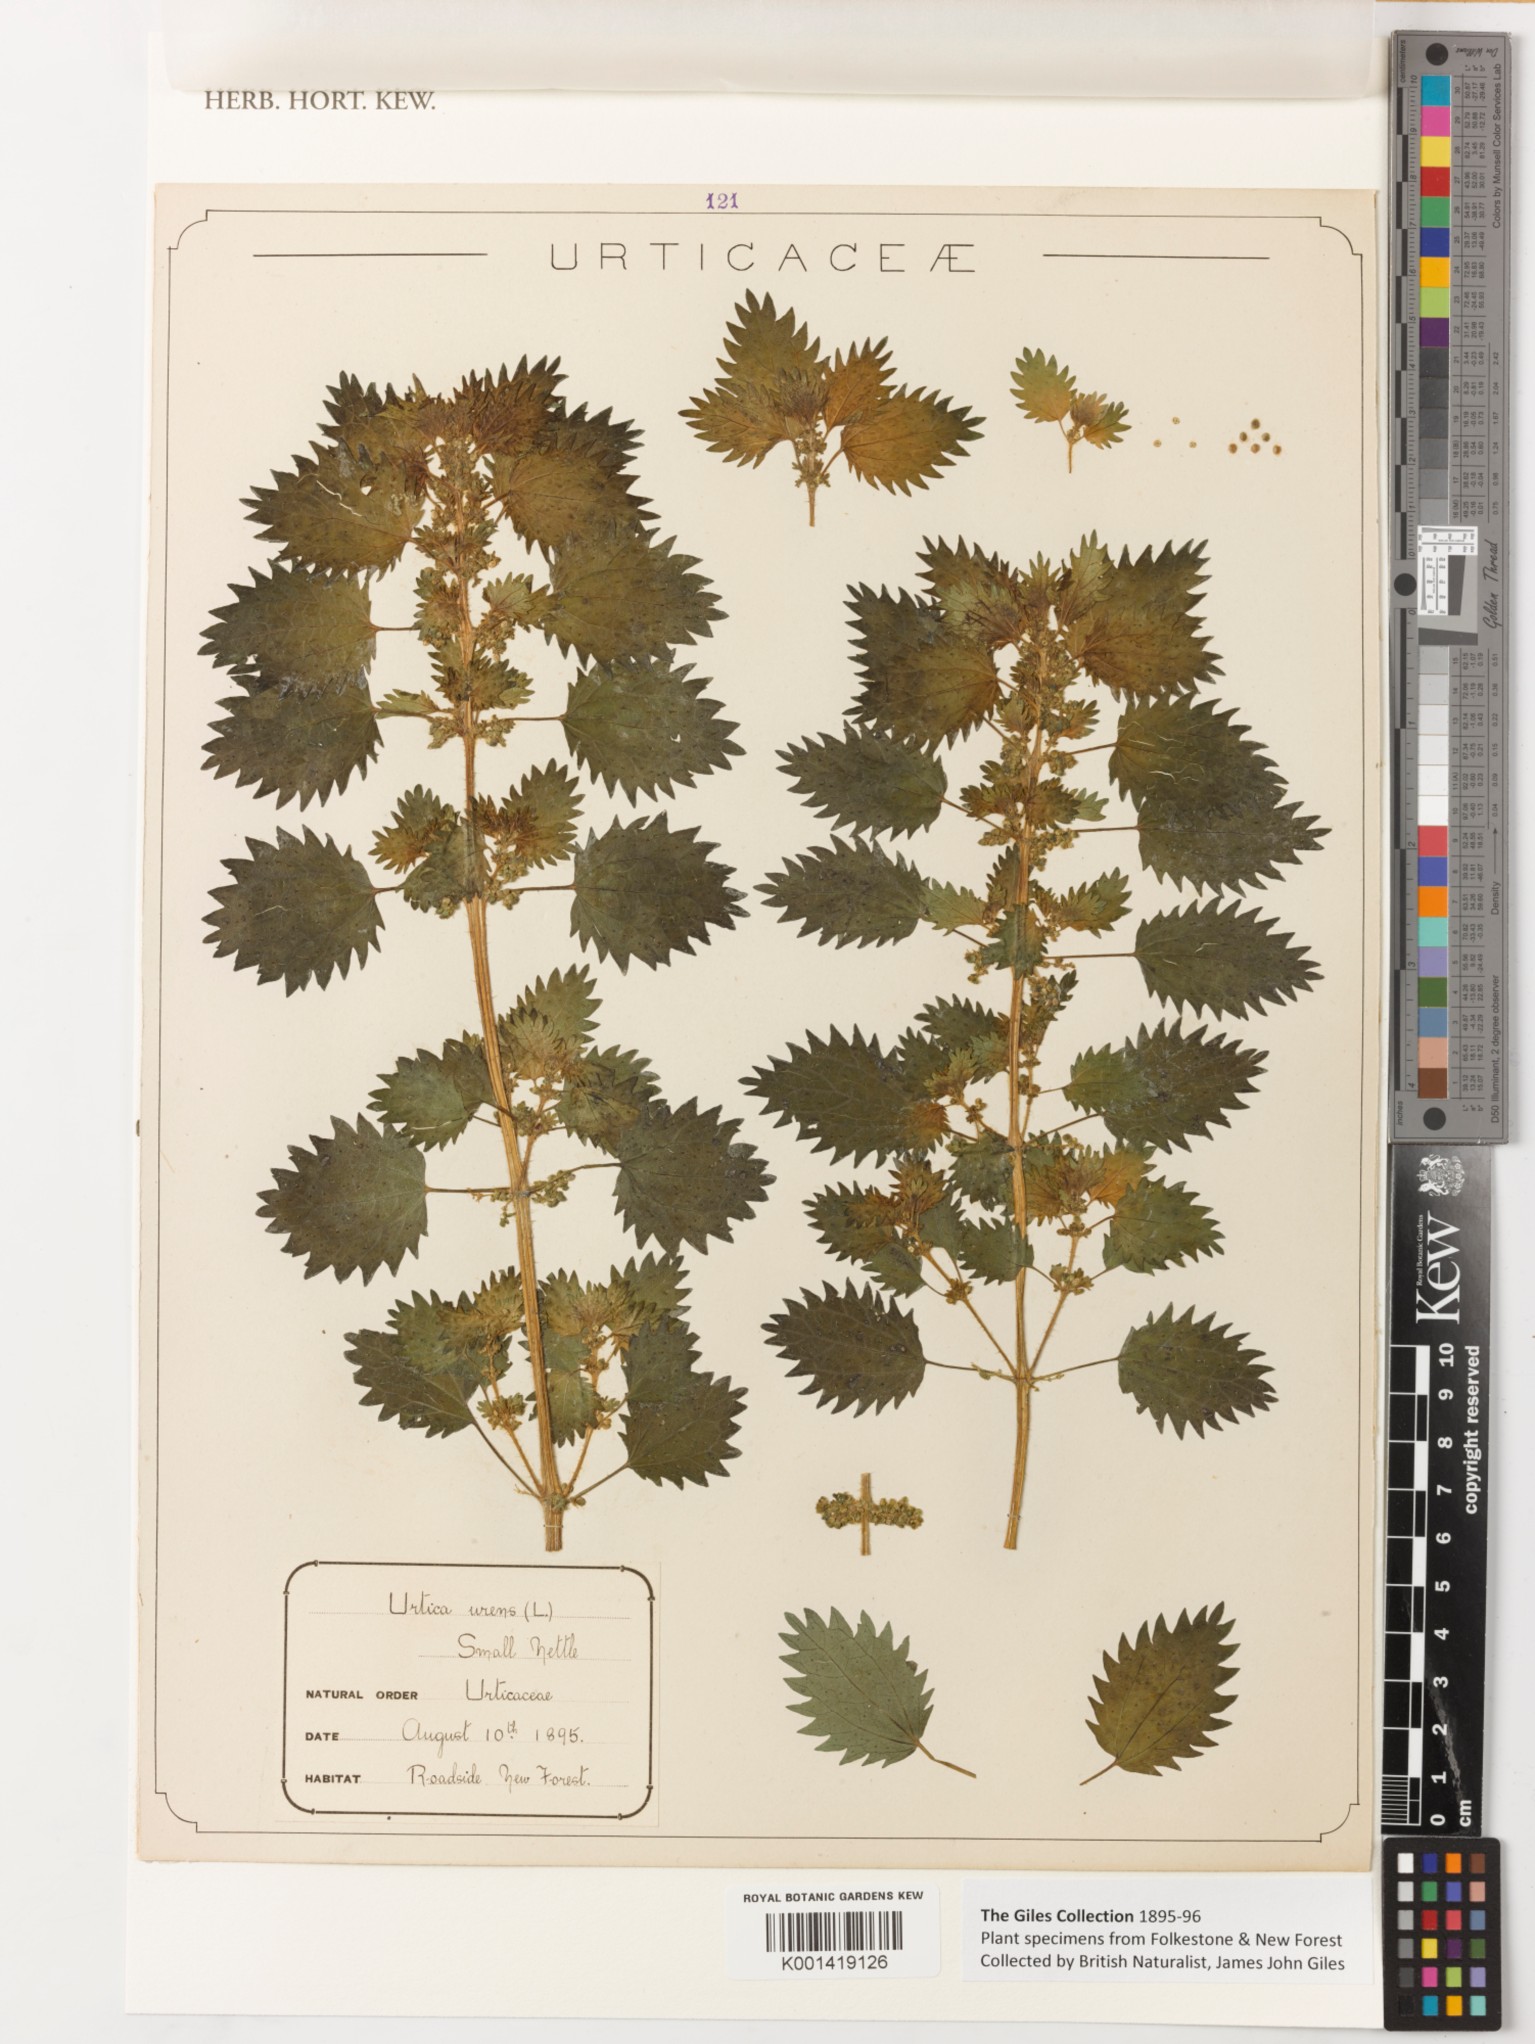 Dried pressed small nettle specimens mounted on a herbarium sheet